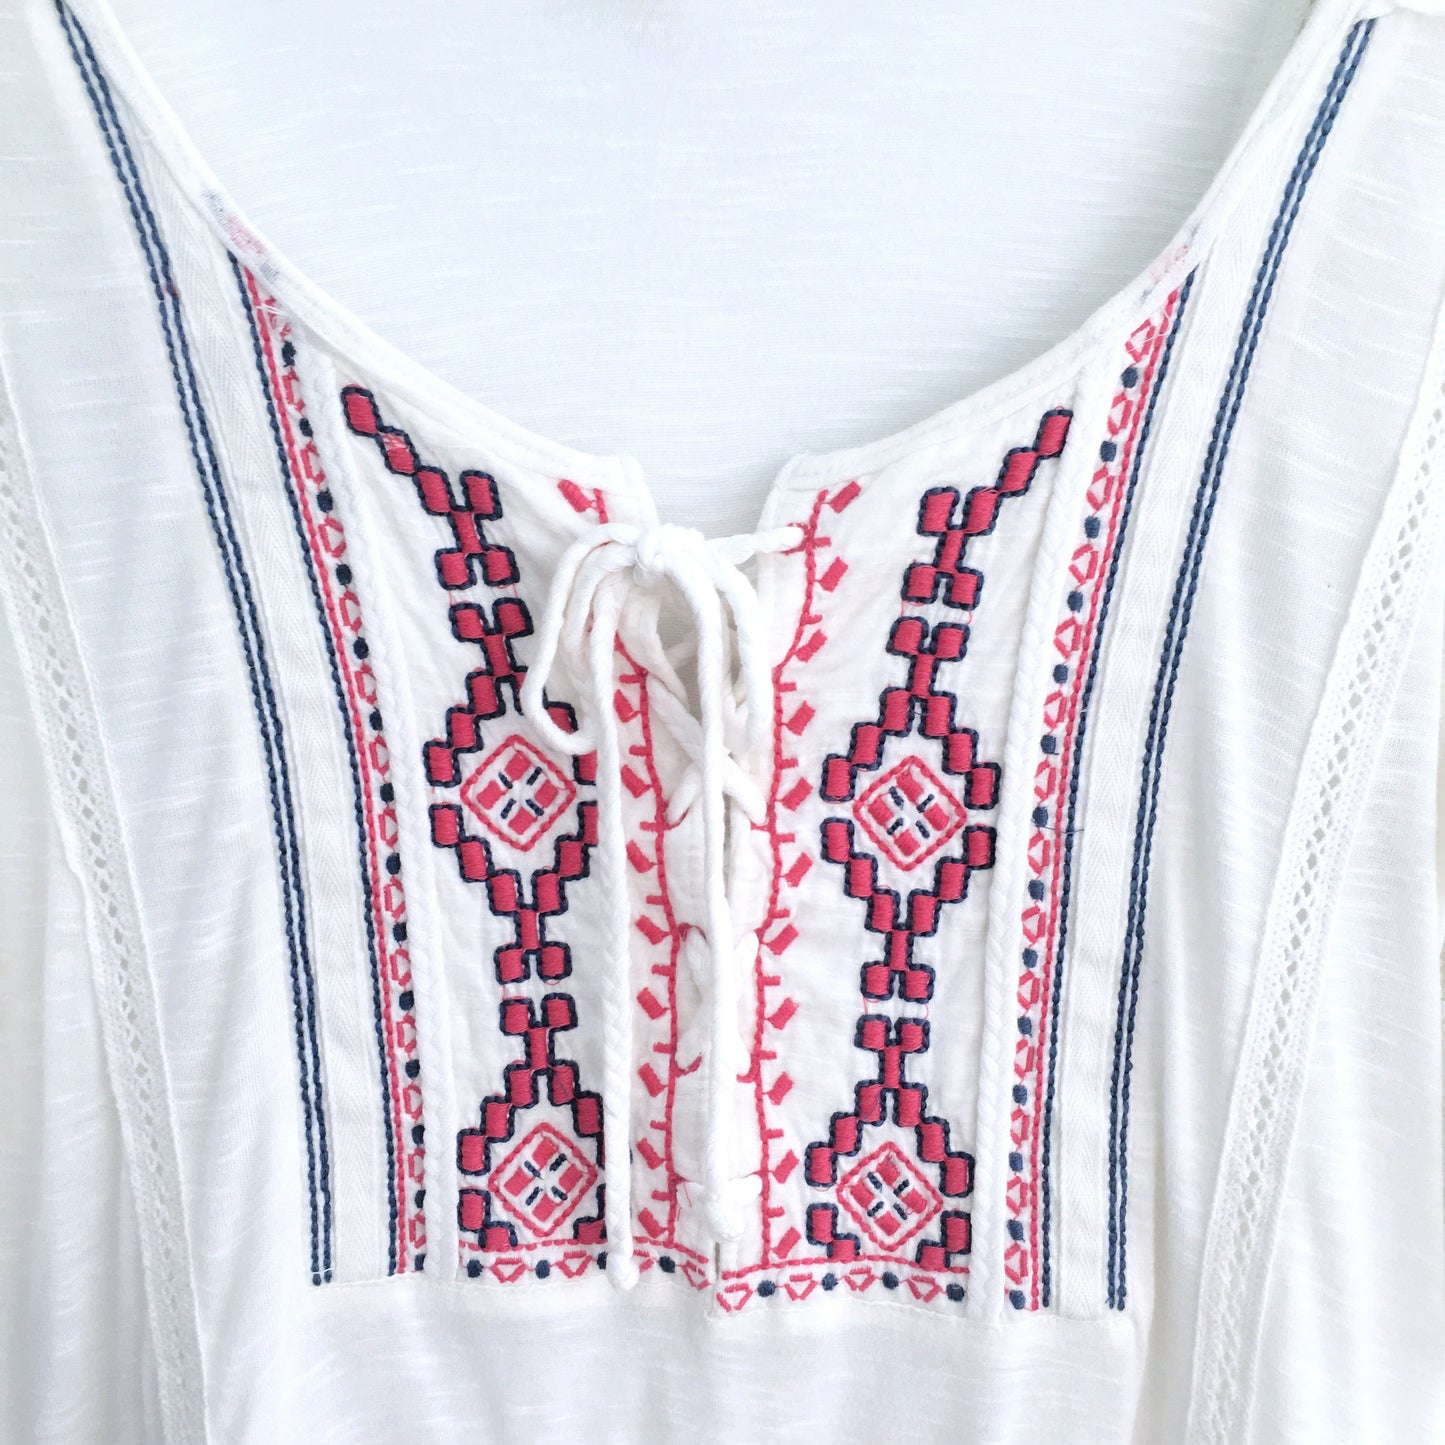 Free People Boho top with Embroidery - size Small